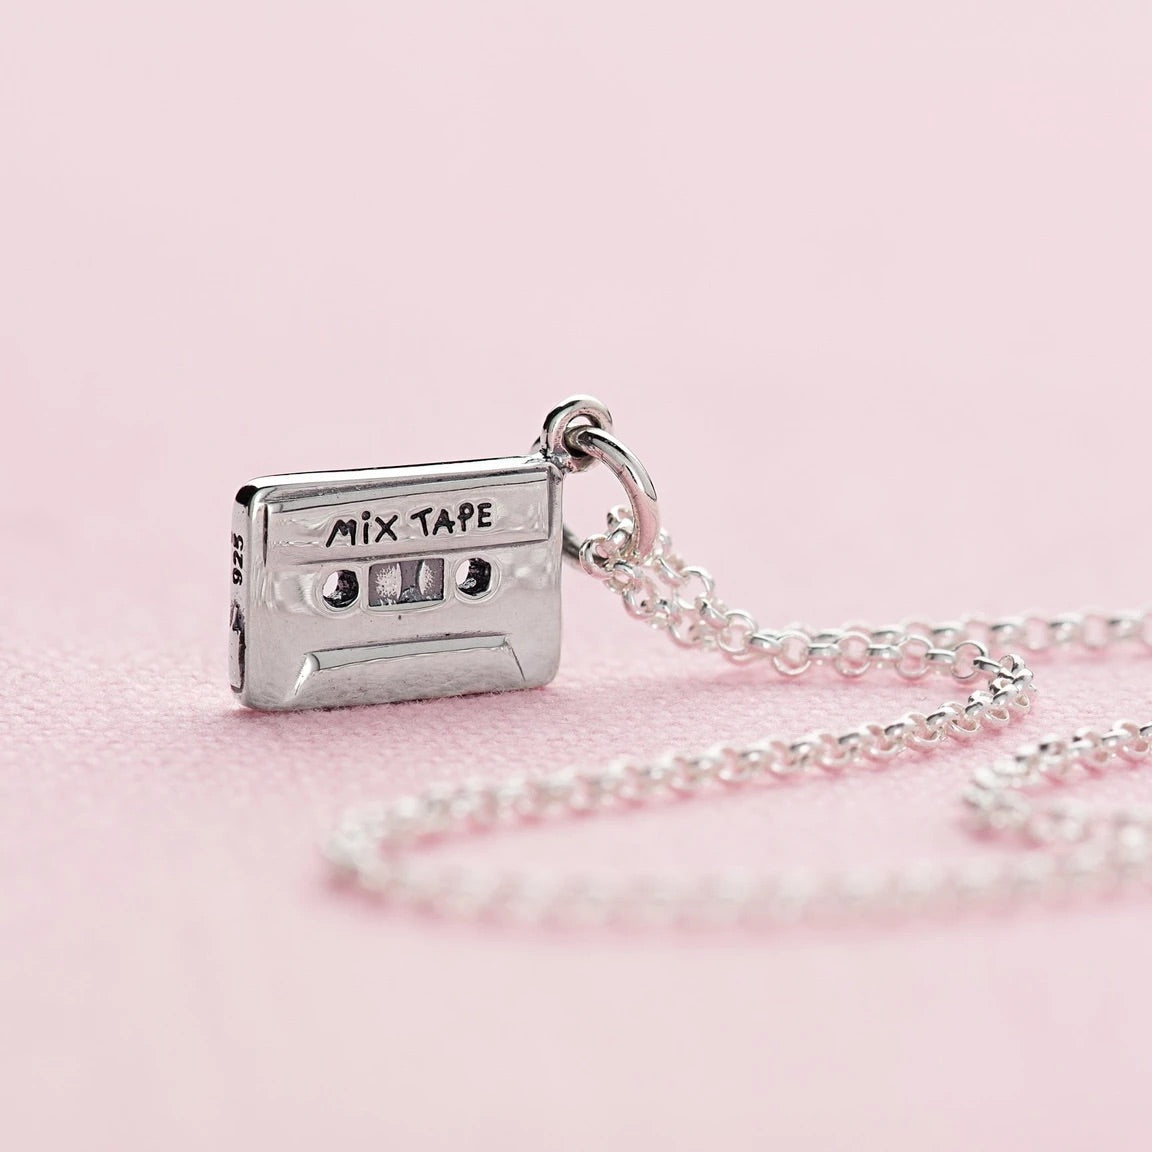 Mix tape necklace - sterling silver